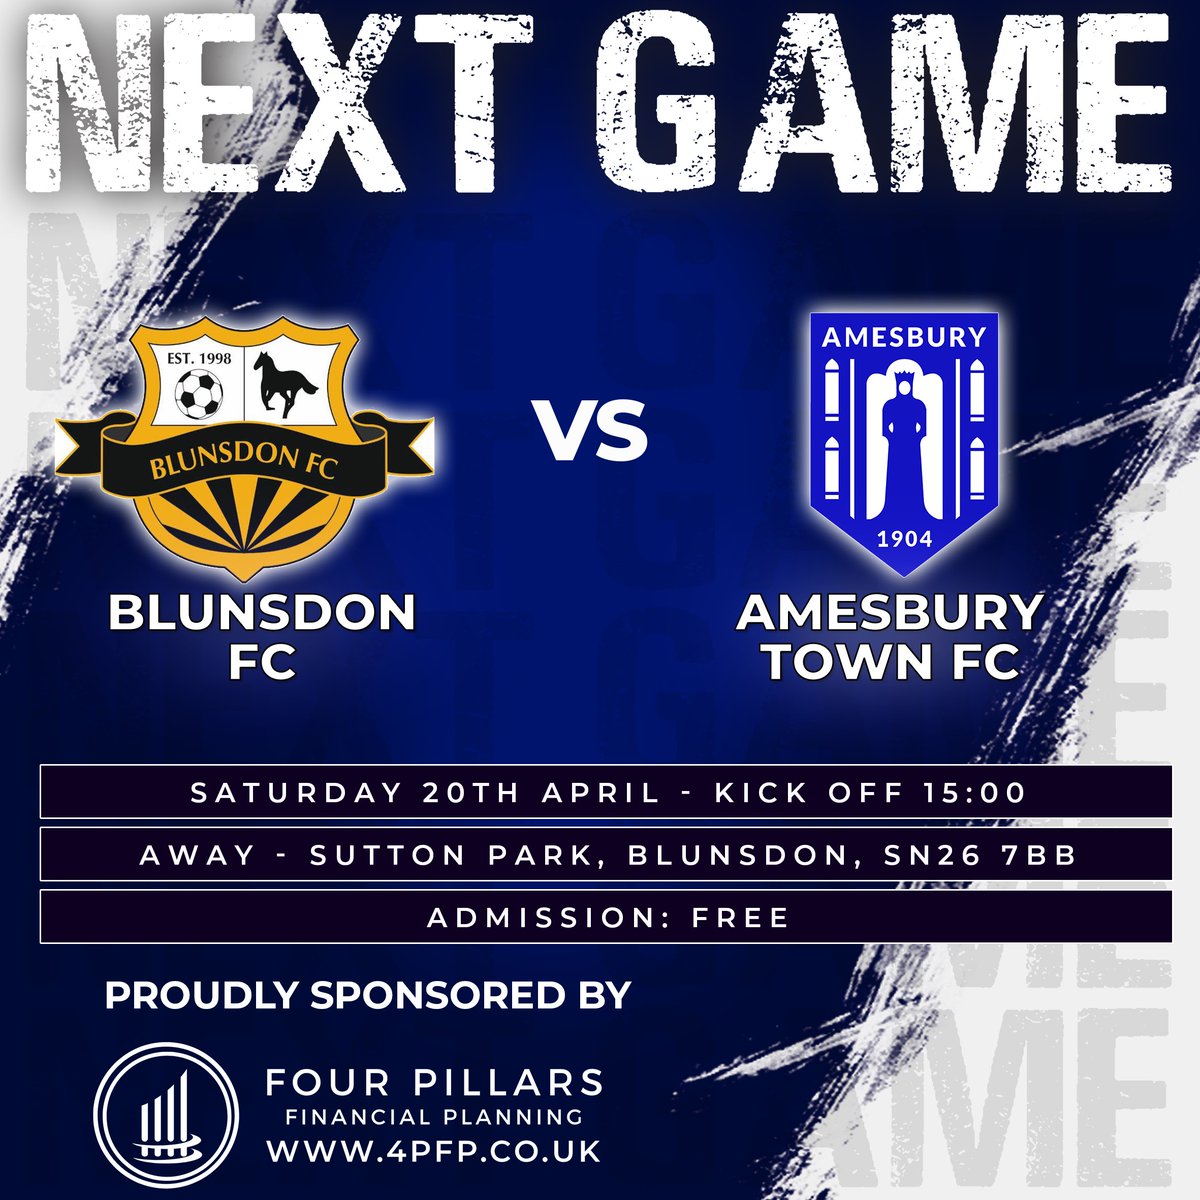 𝗡𝗘𝗫𝗧 𝗨𝗣 This Saturday we face Blunsdon away at Sutton Park. Full details below ⚪️🔵⚪️🔵 🆚:@blunnyfc 🏆:@WiltsLeague 📌: Away - Sutton Park, Blunsdon, SN267BB 🧭: bit.ly/BlunnyFC ⏰: 15:00 💵: FREE